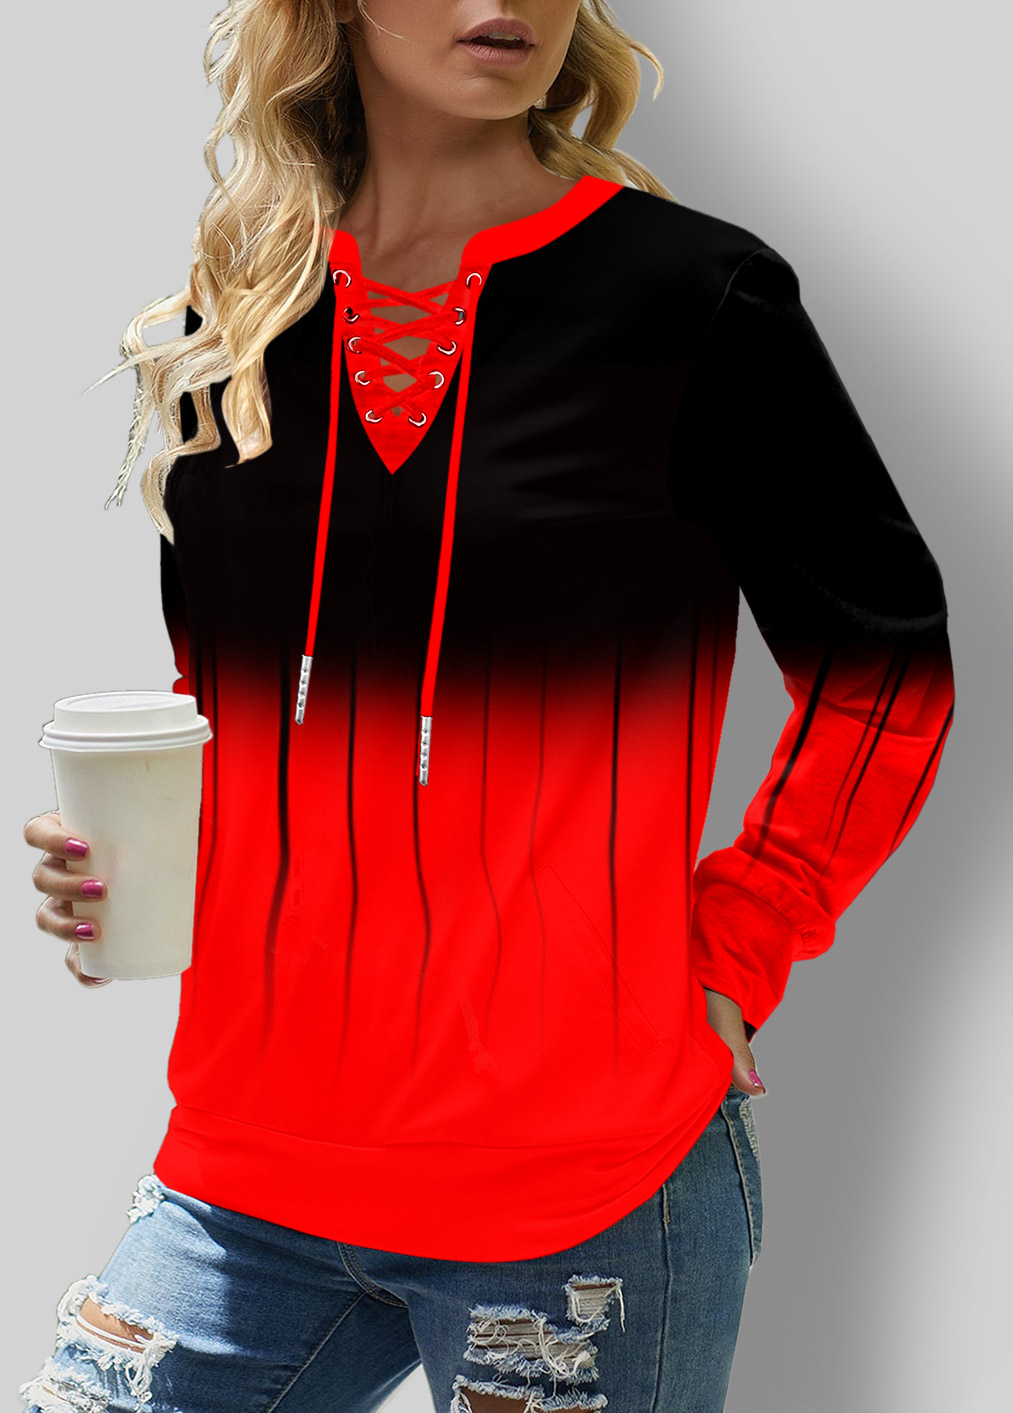 Lace Up Long Sleeve Red Ombre Sweatshirt